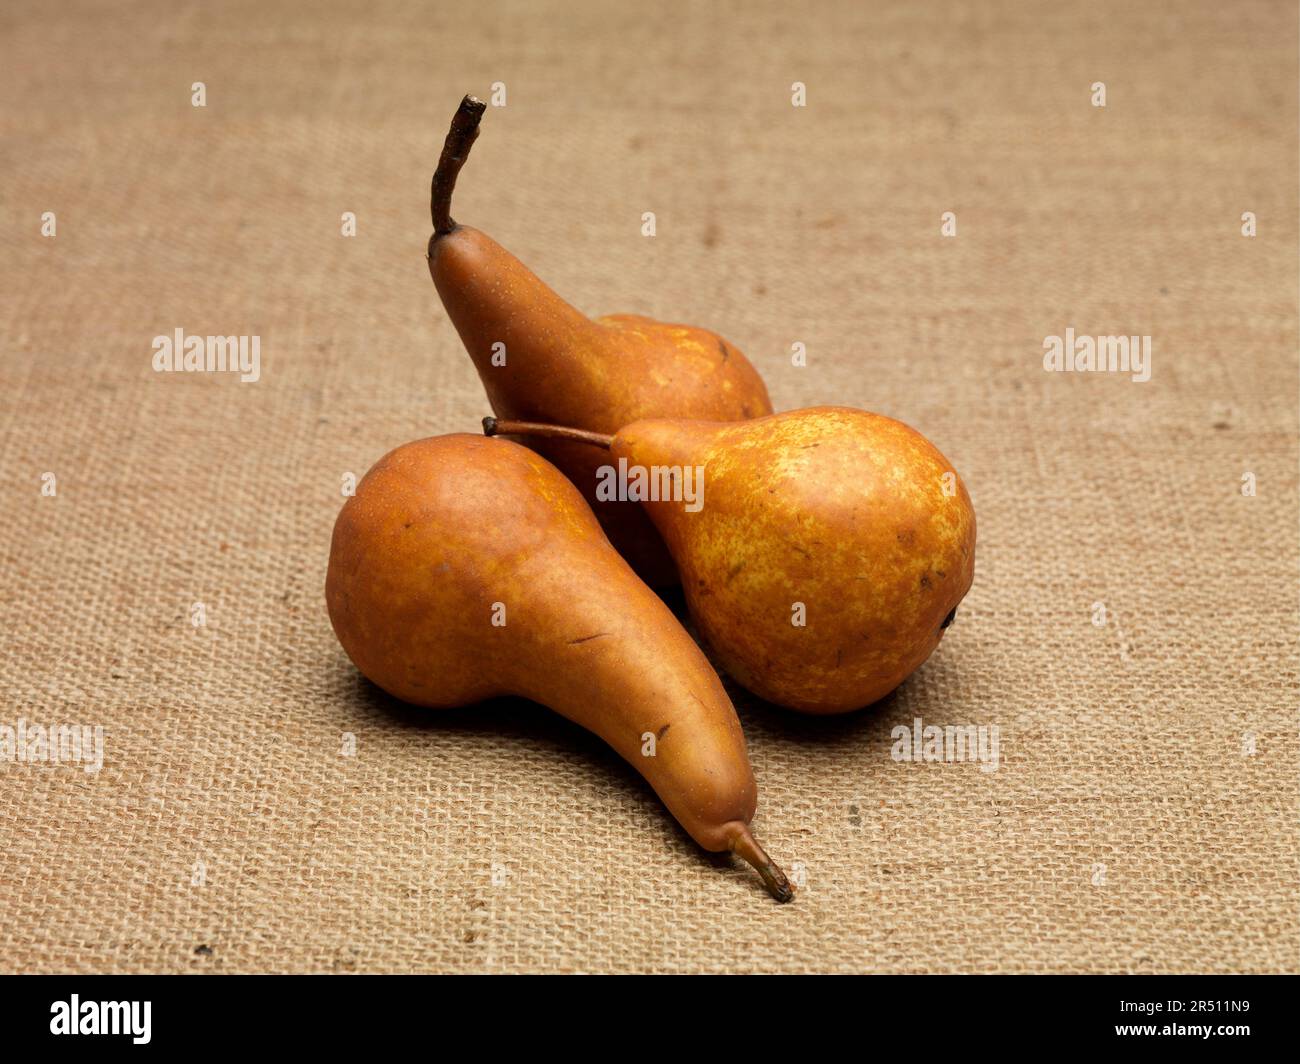 Pears of the variety 'Beurre bosc' on sackcloth Stock Photo